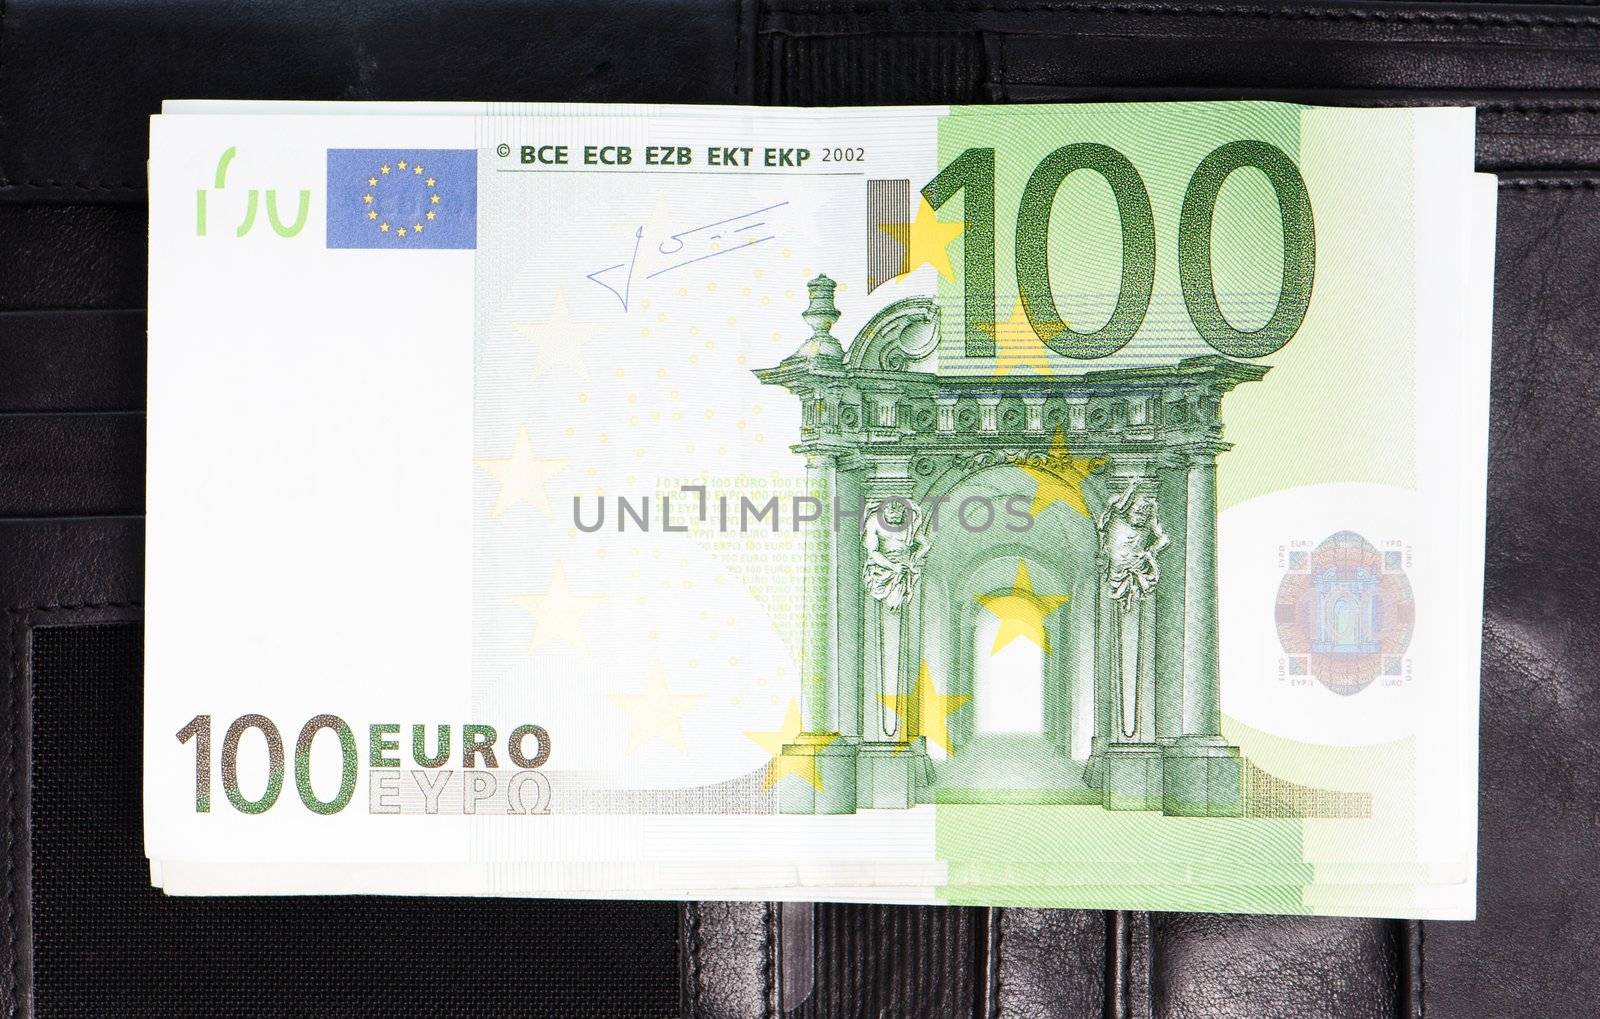 Euro banknotes on the black purse